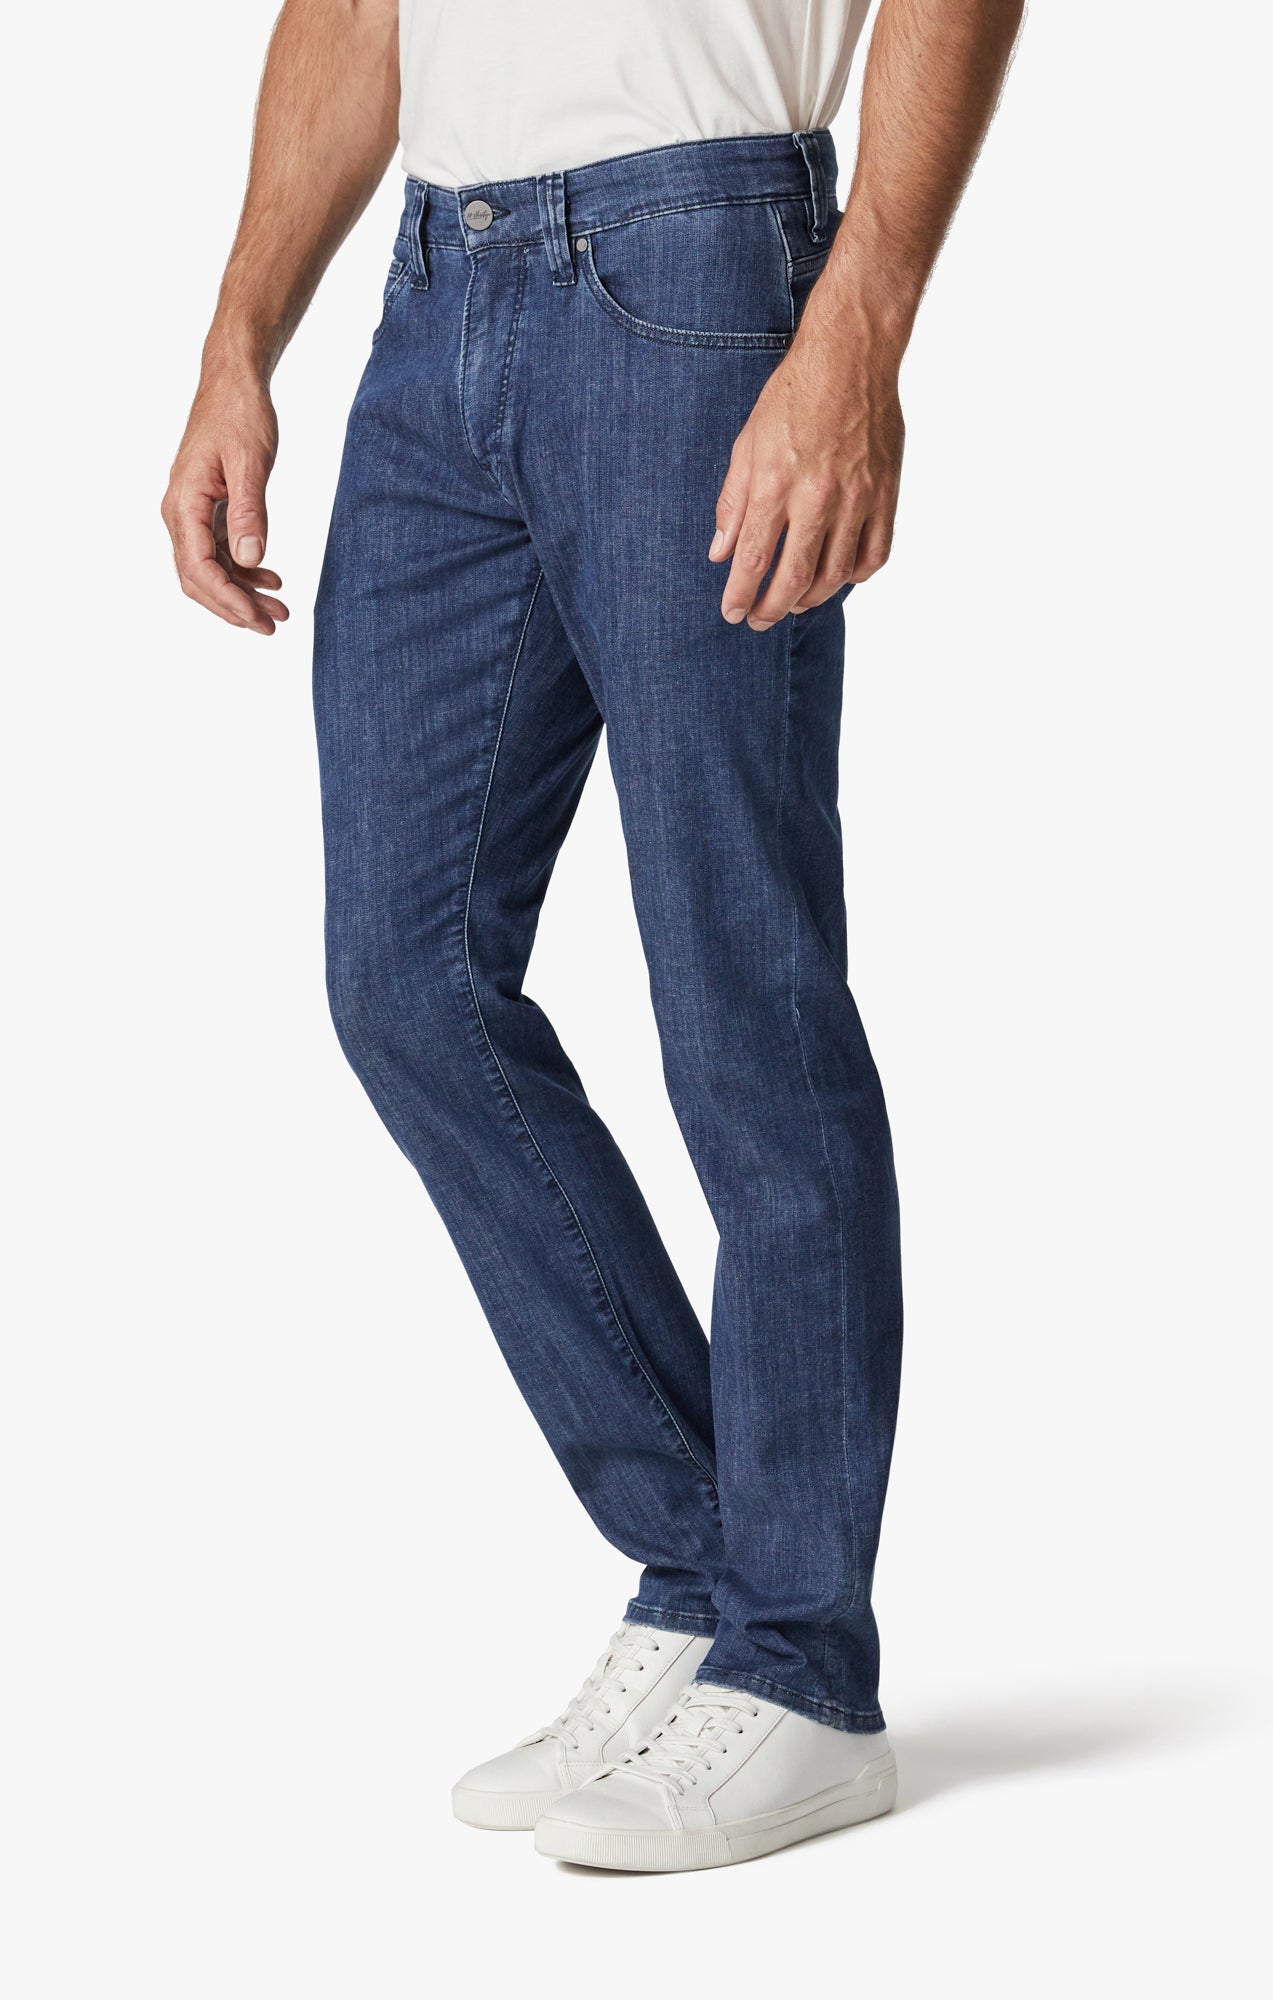 Courage Straight Leg Jeans In Mid Kona Image 4